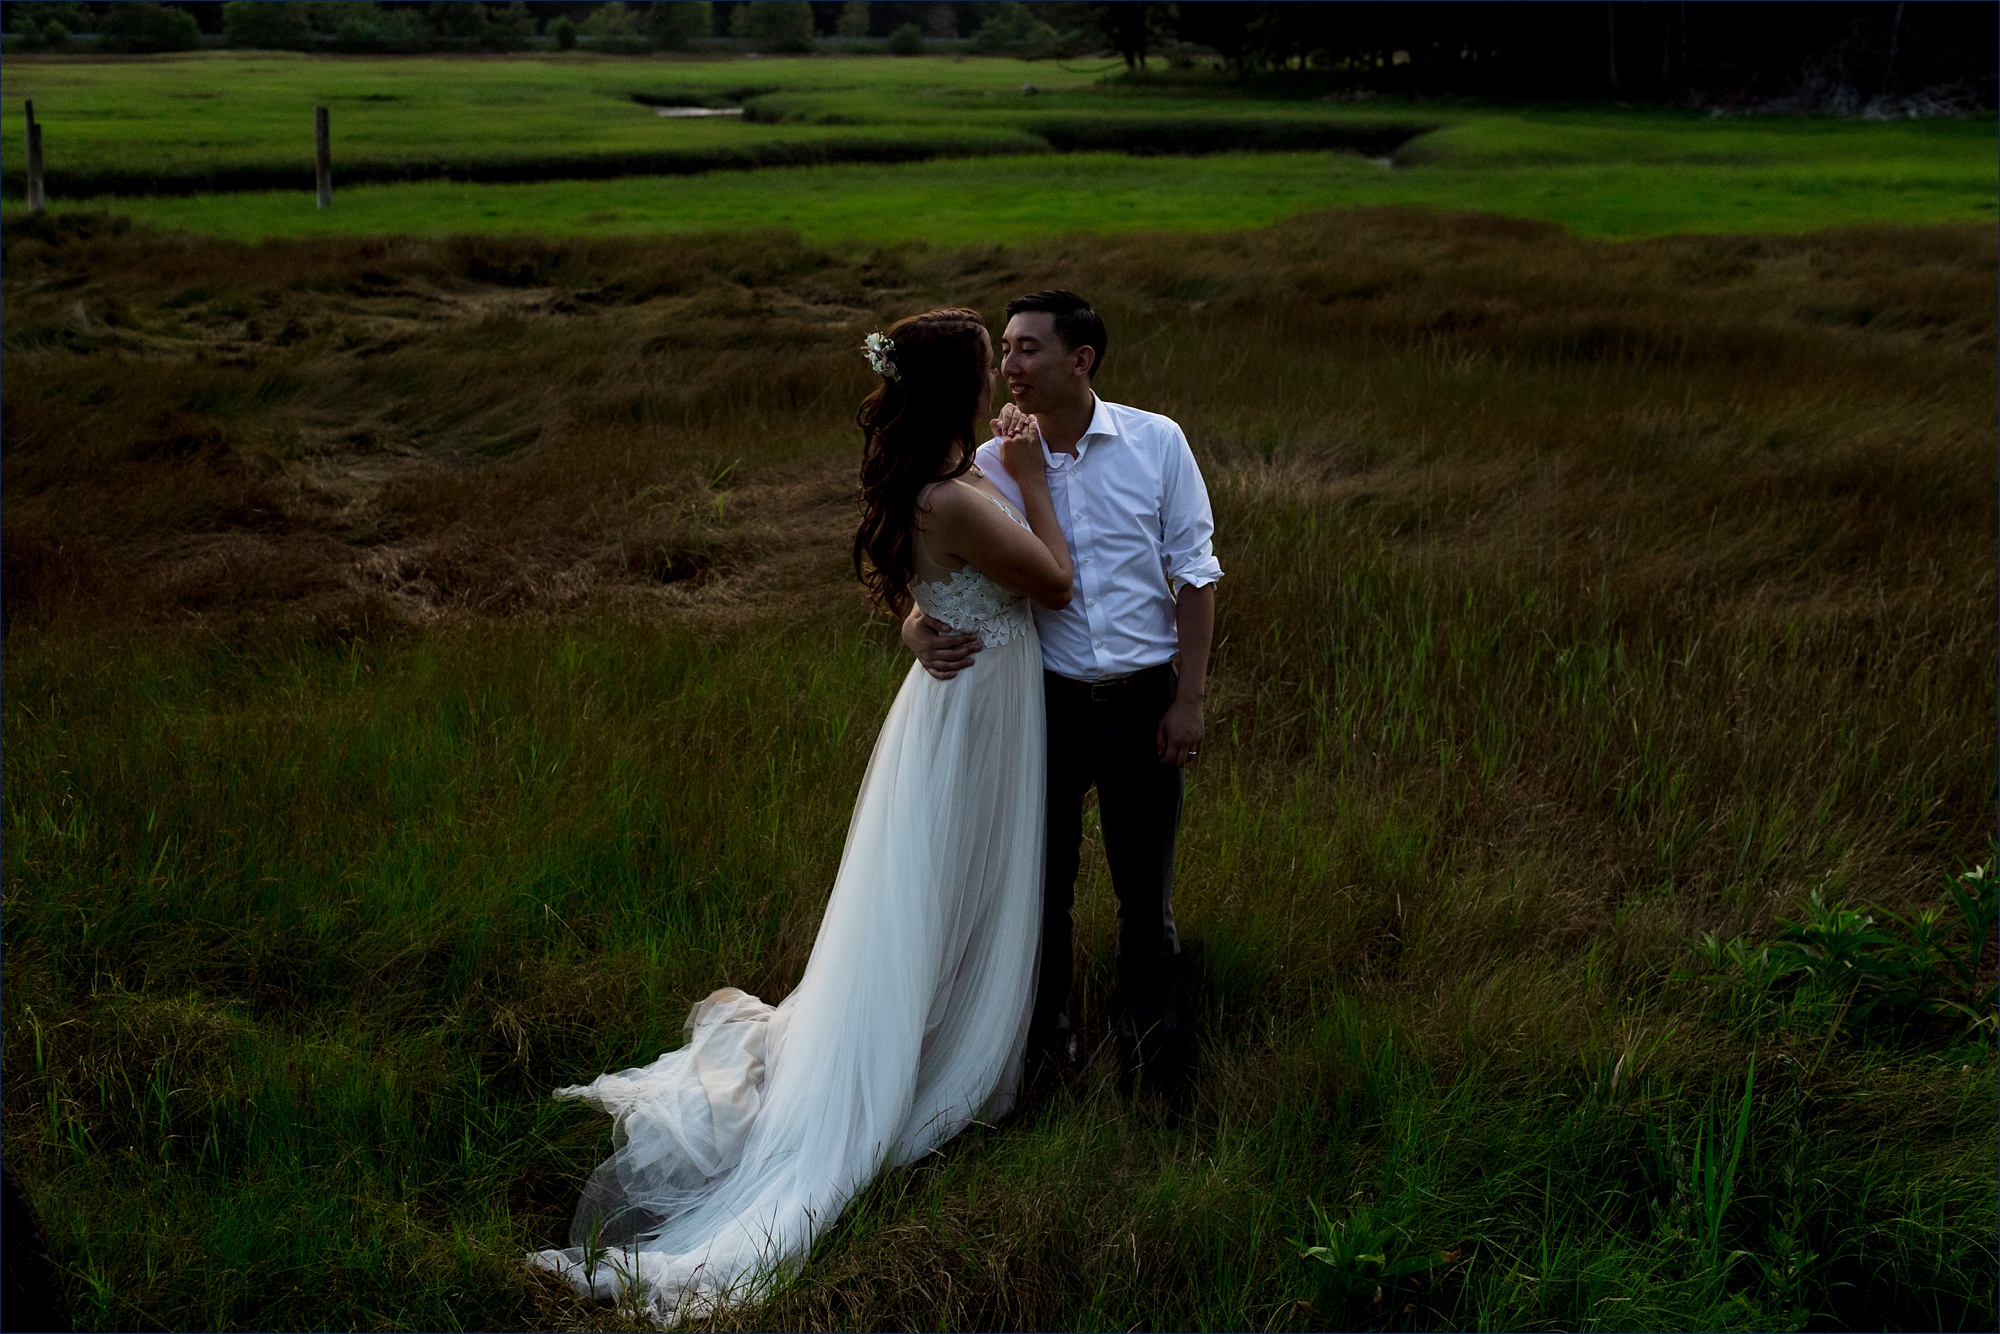 The bride and groom get close to one another out in the sea grass on their southern Maine wedding